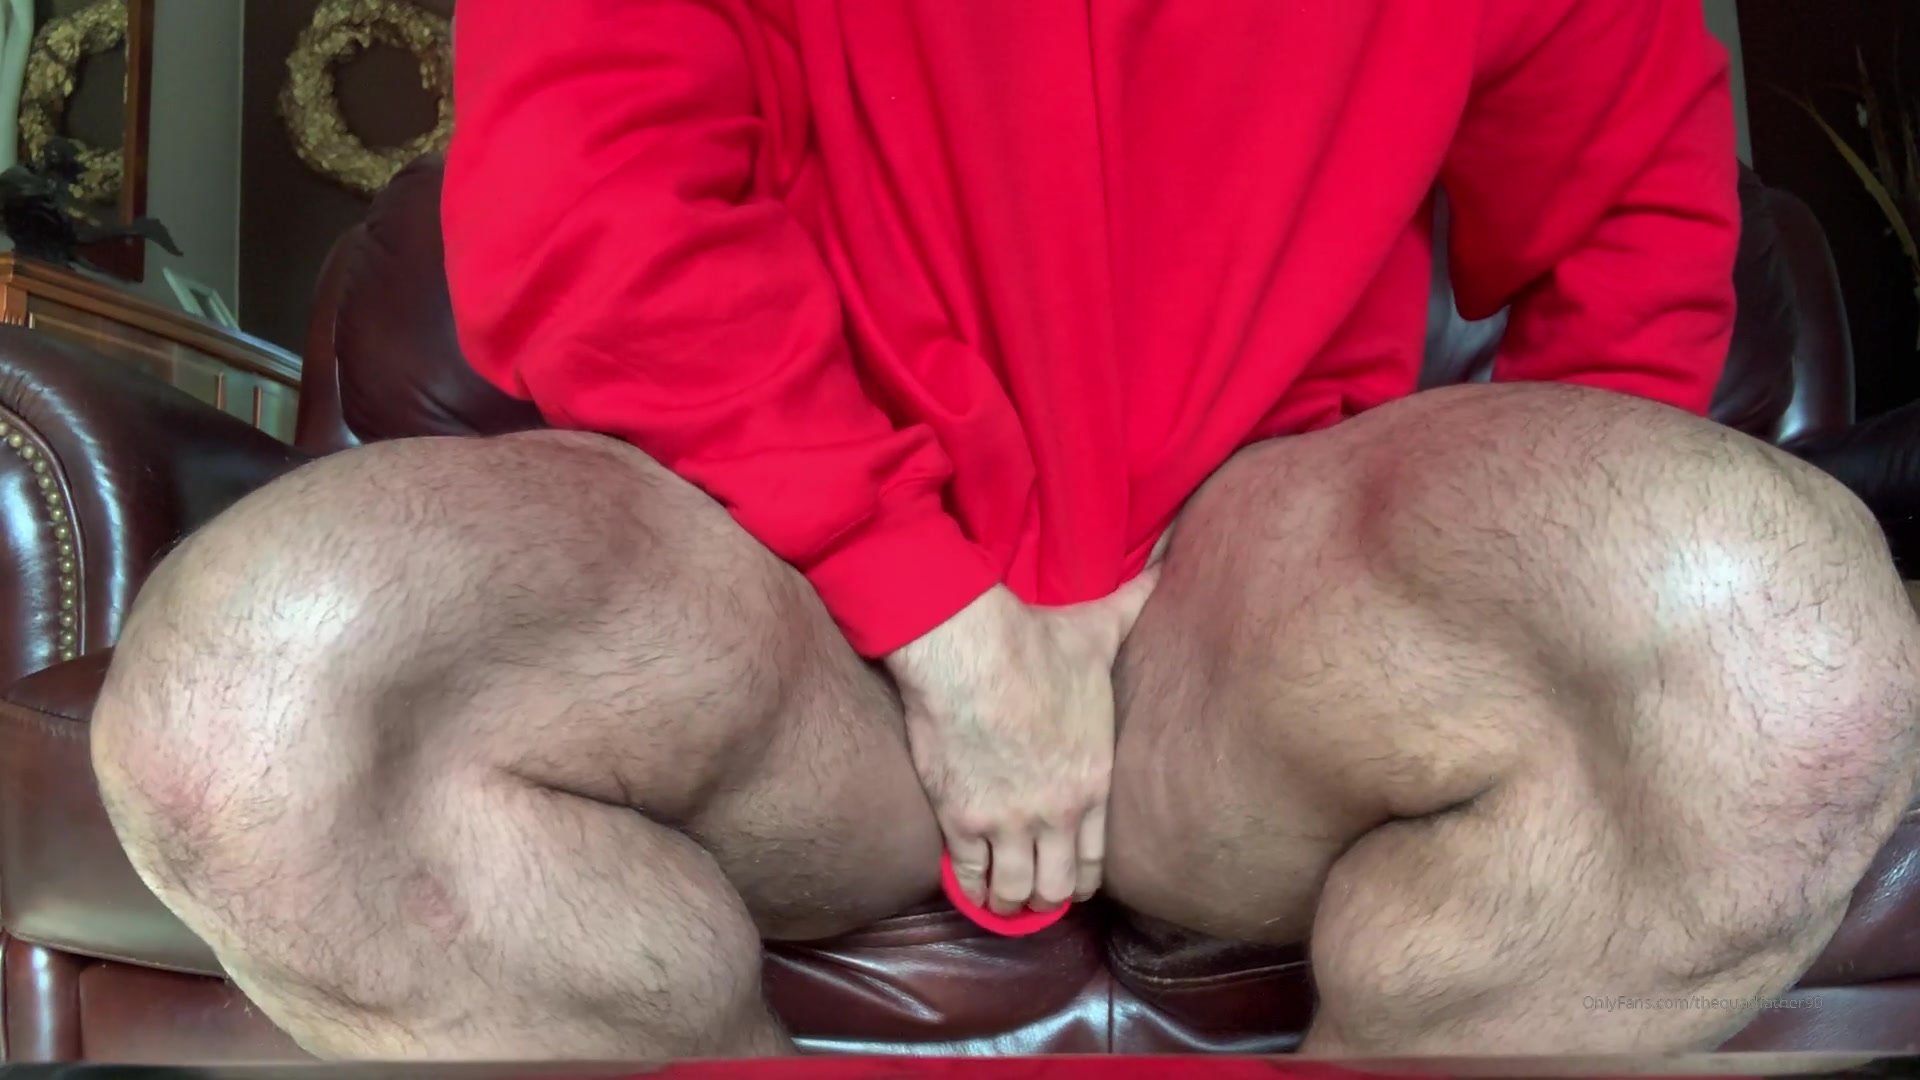 Hairy Thug Porn - Thick Hairy Thighs - ThisVid.com